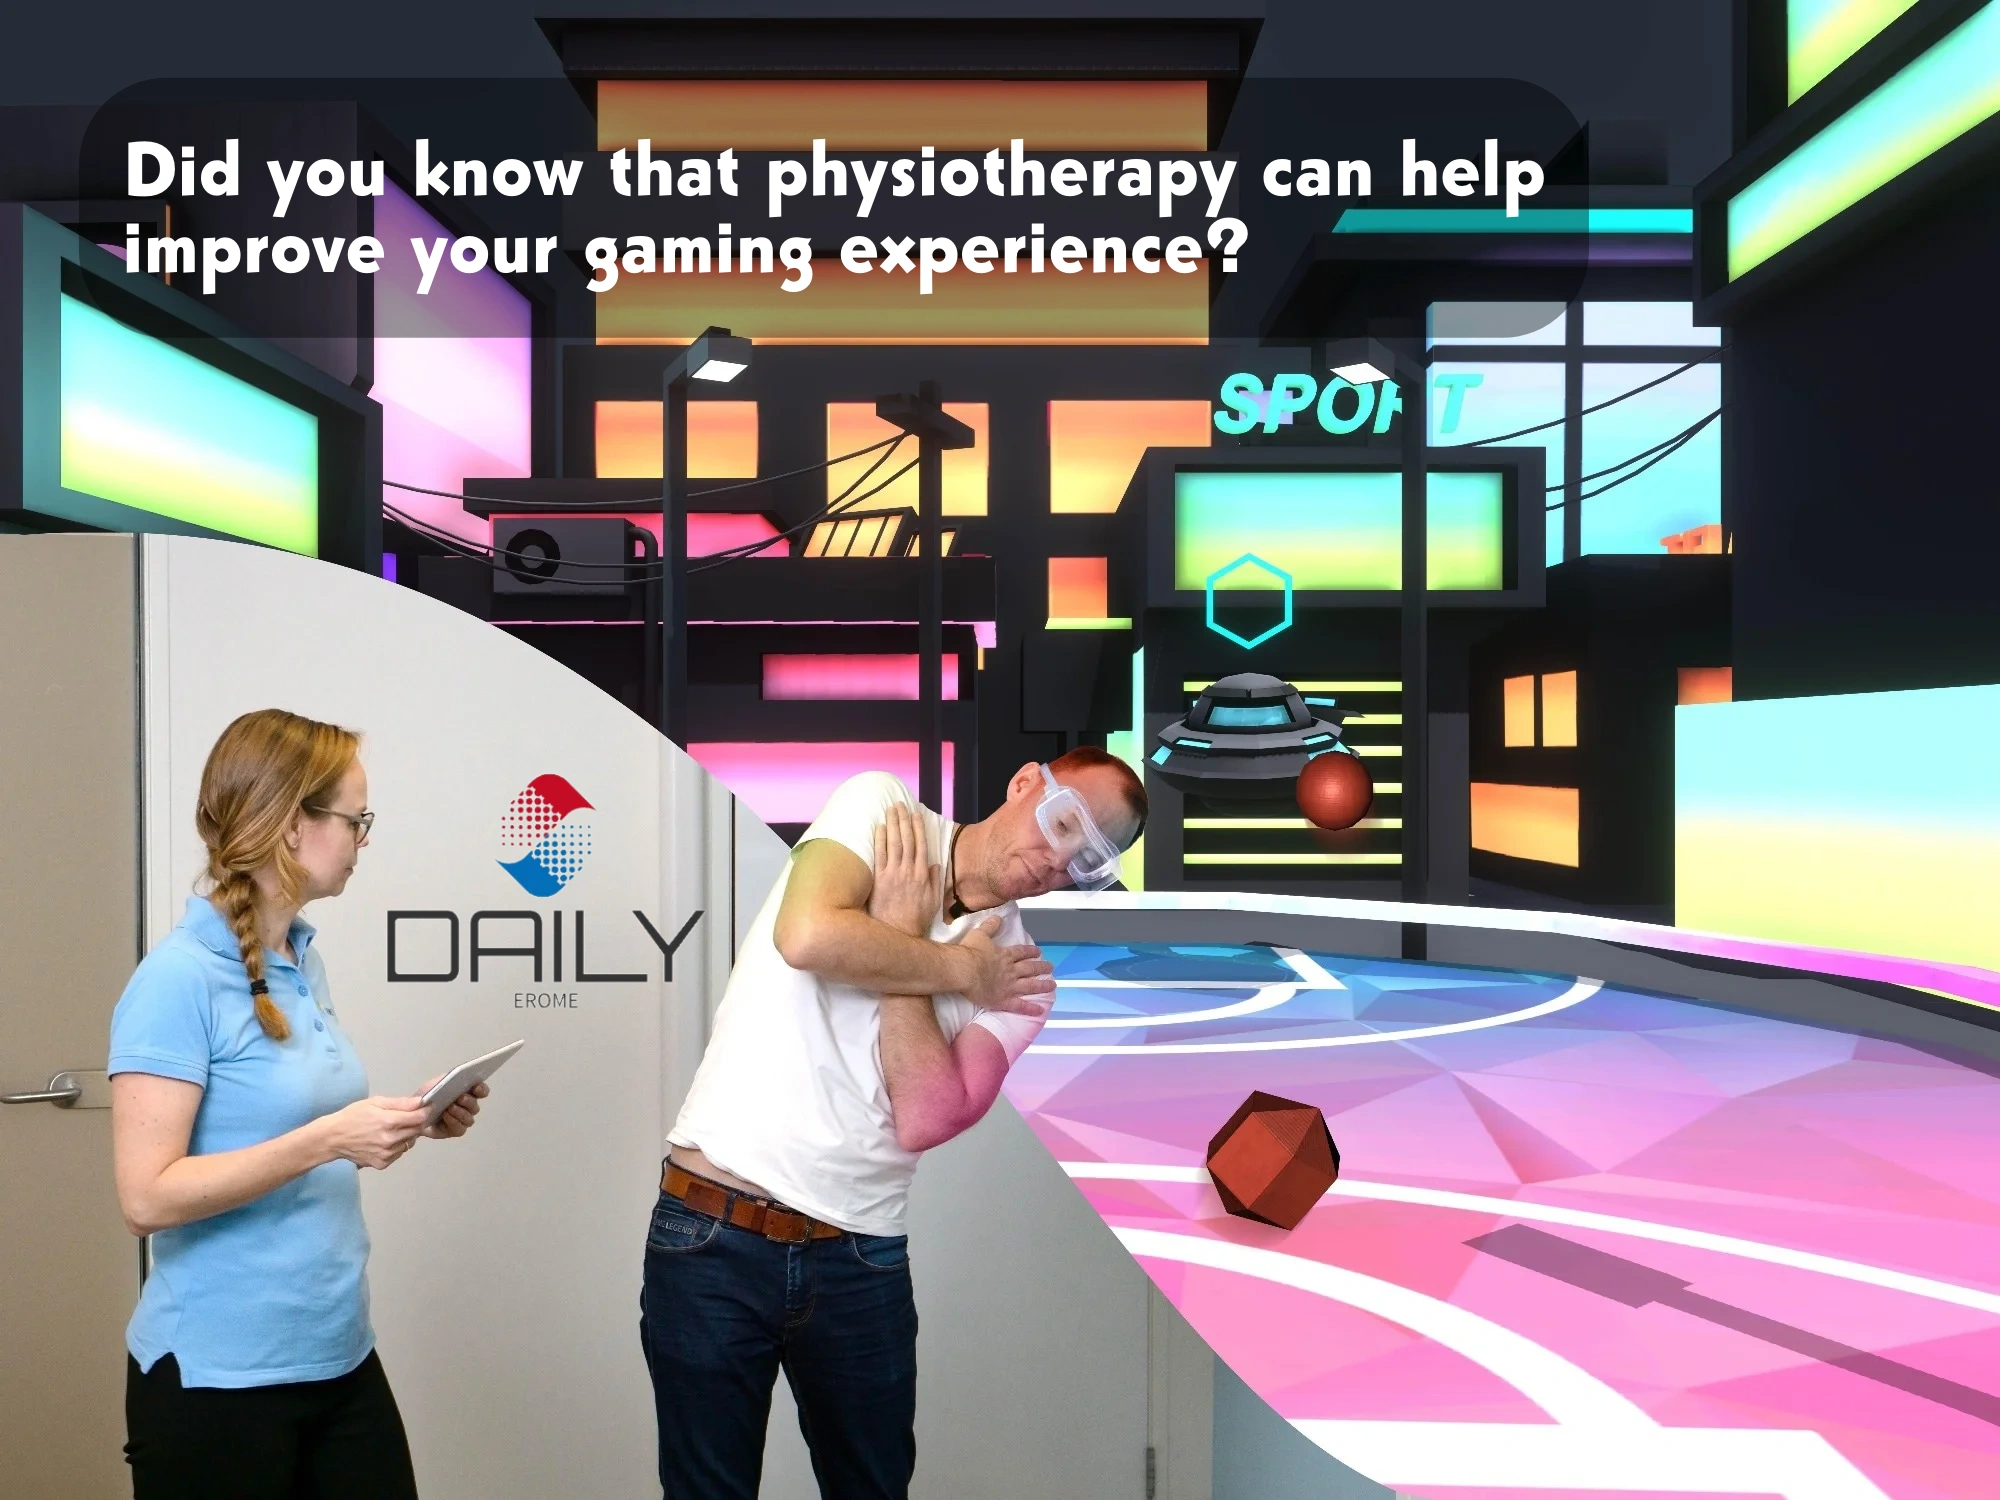 Did you know that physiotherapy can help improve your gaming experience?